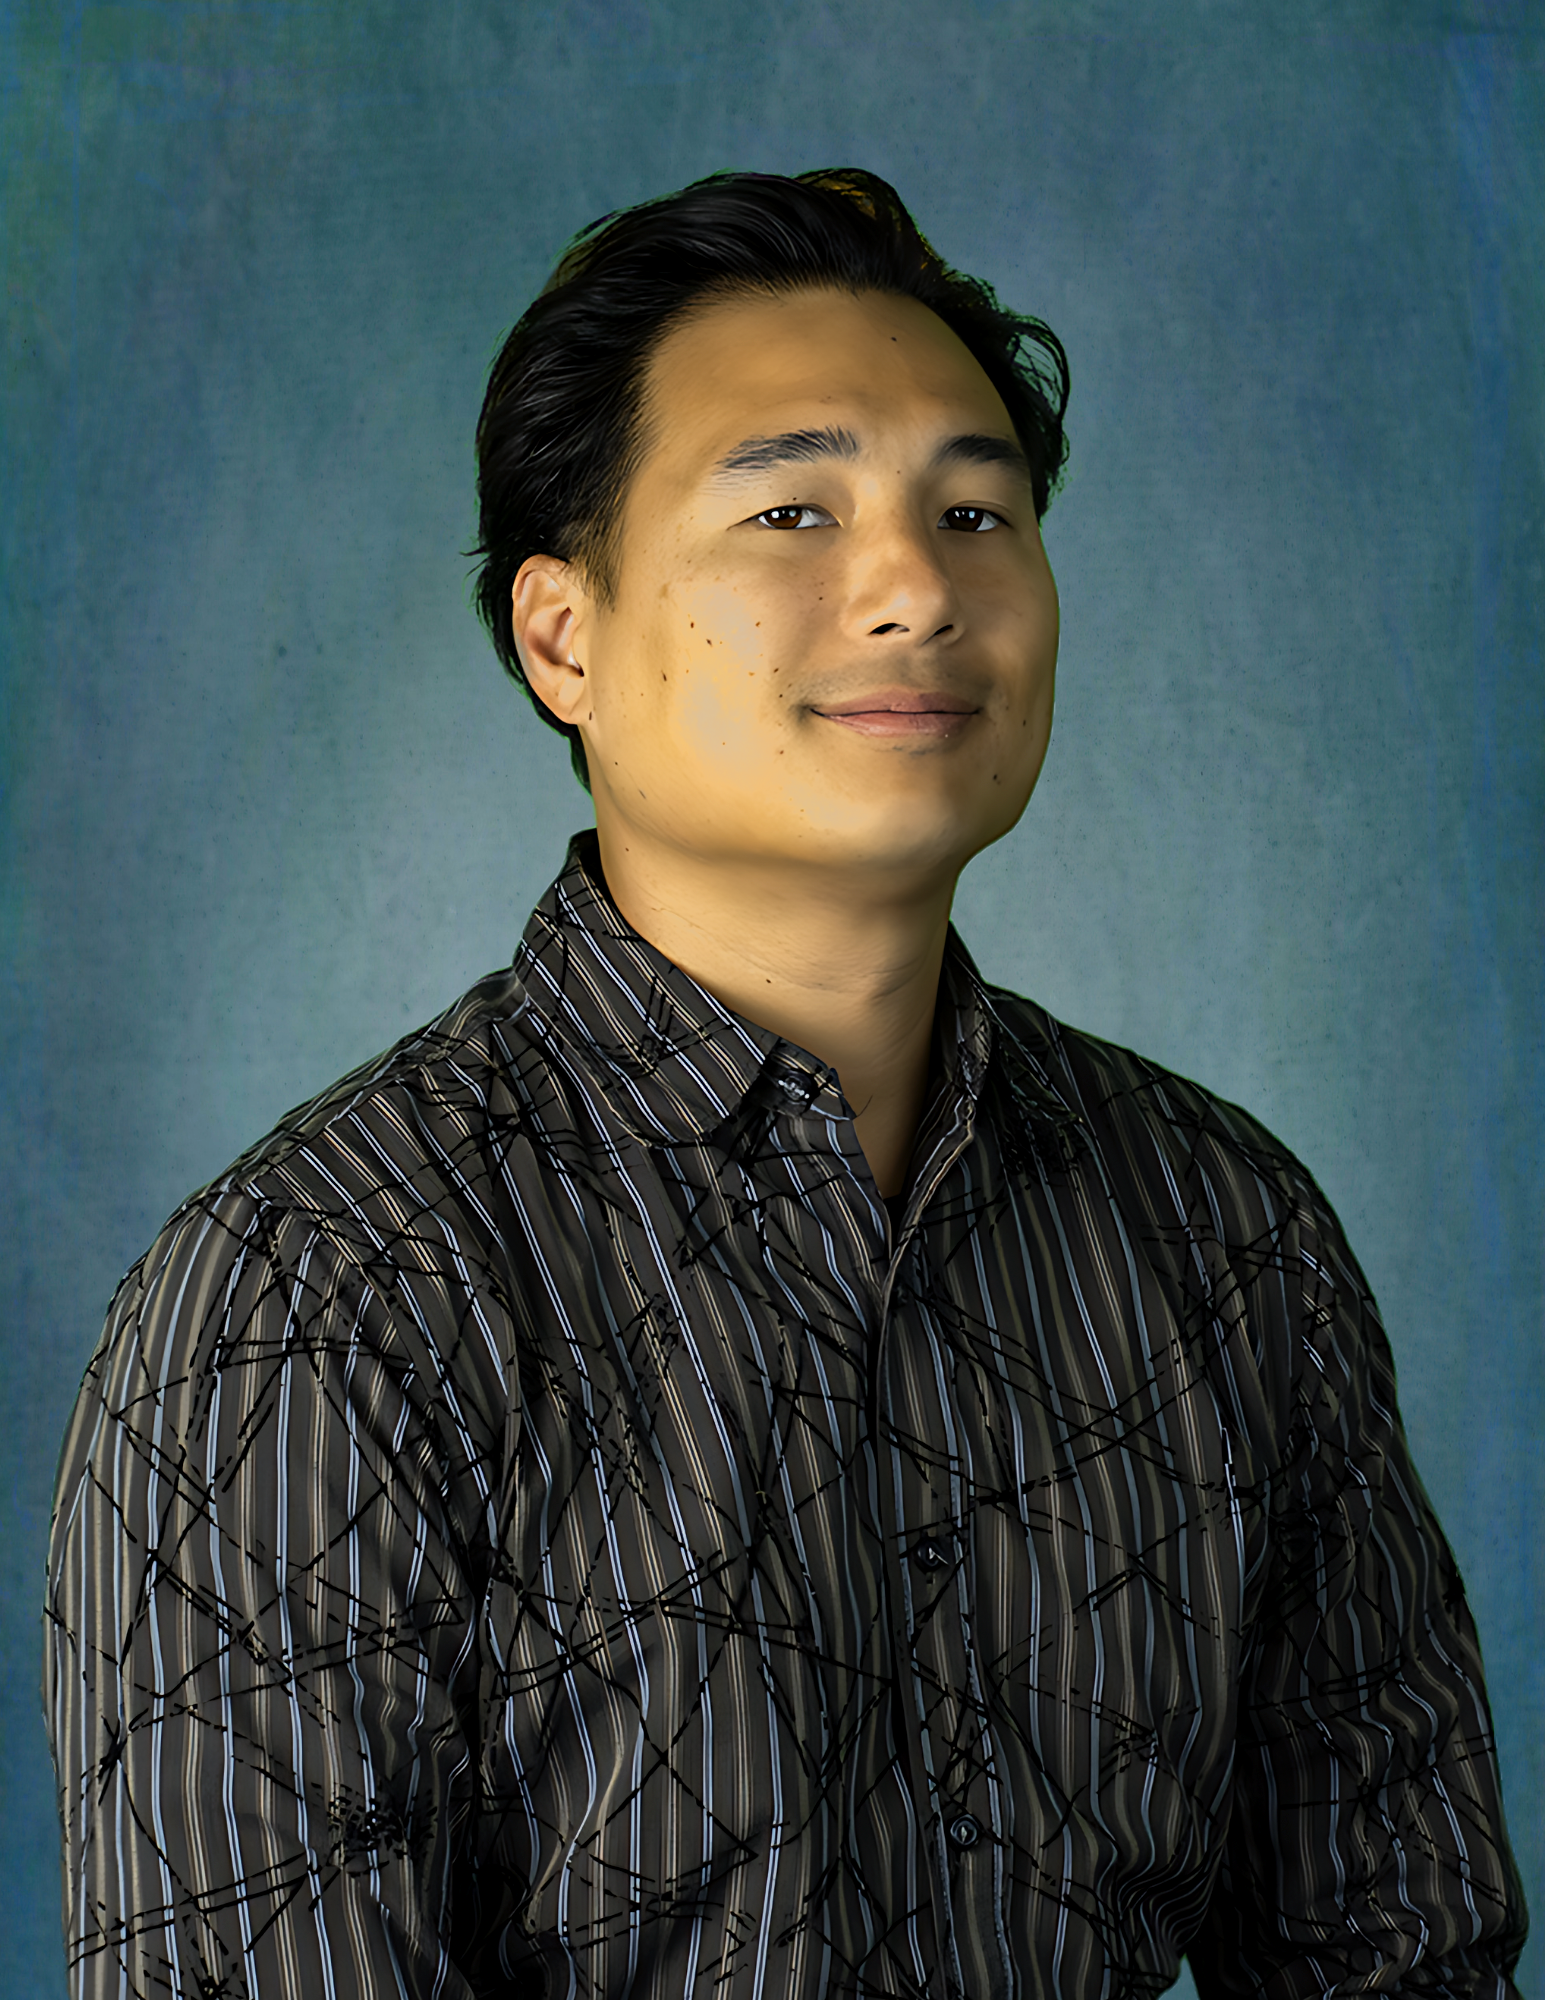 A man in a striped shirt stands in front of a blue background